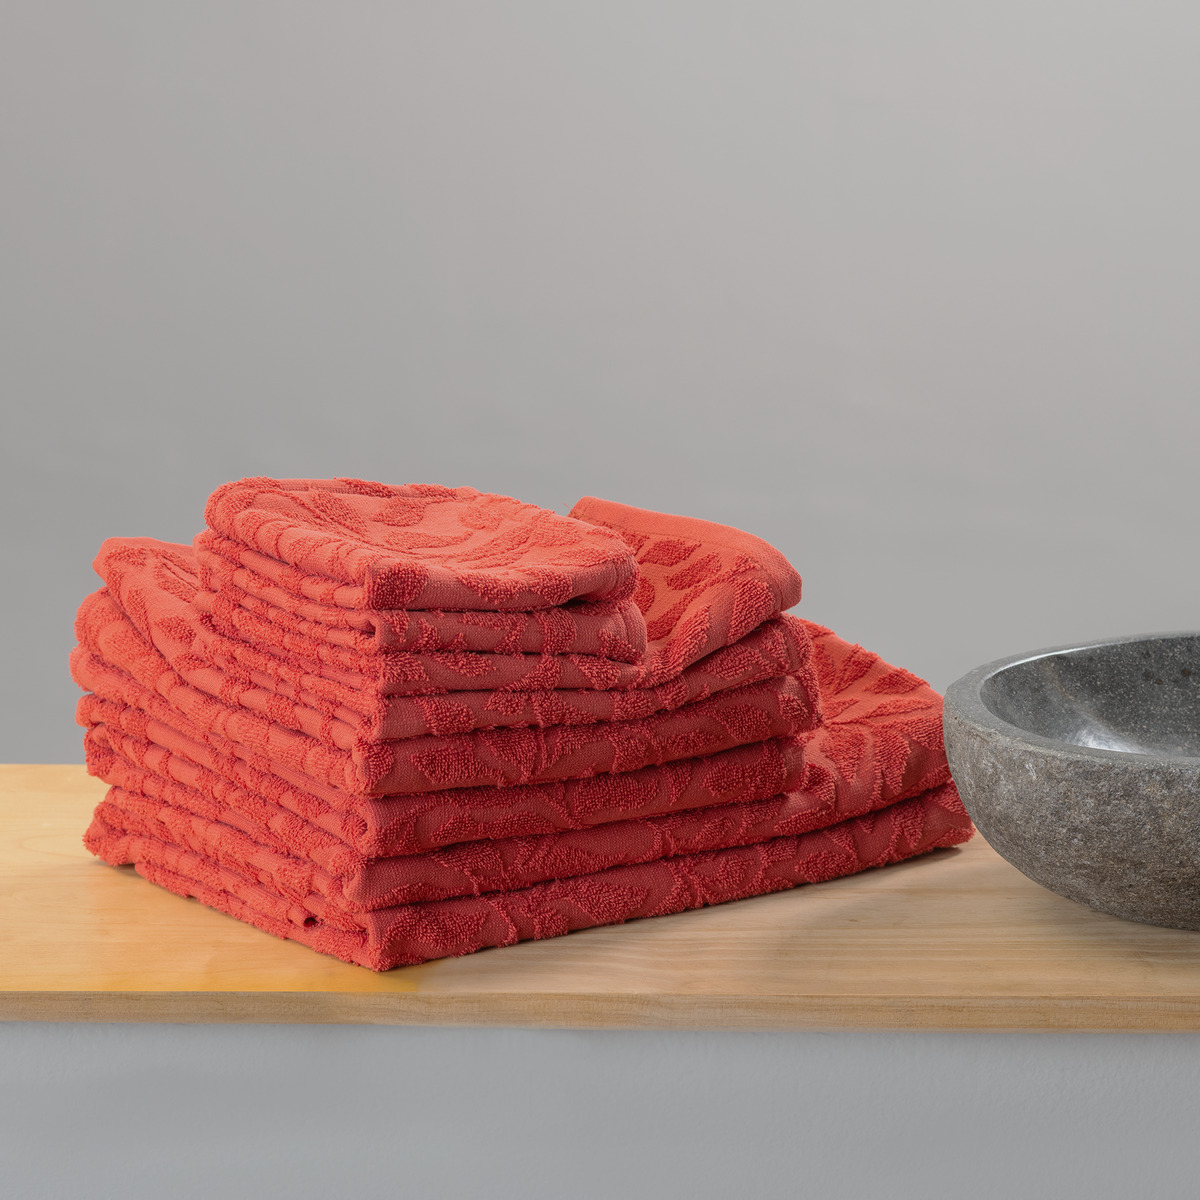 Red Home Soap towel